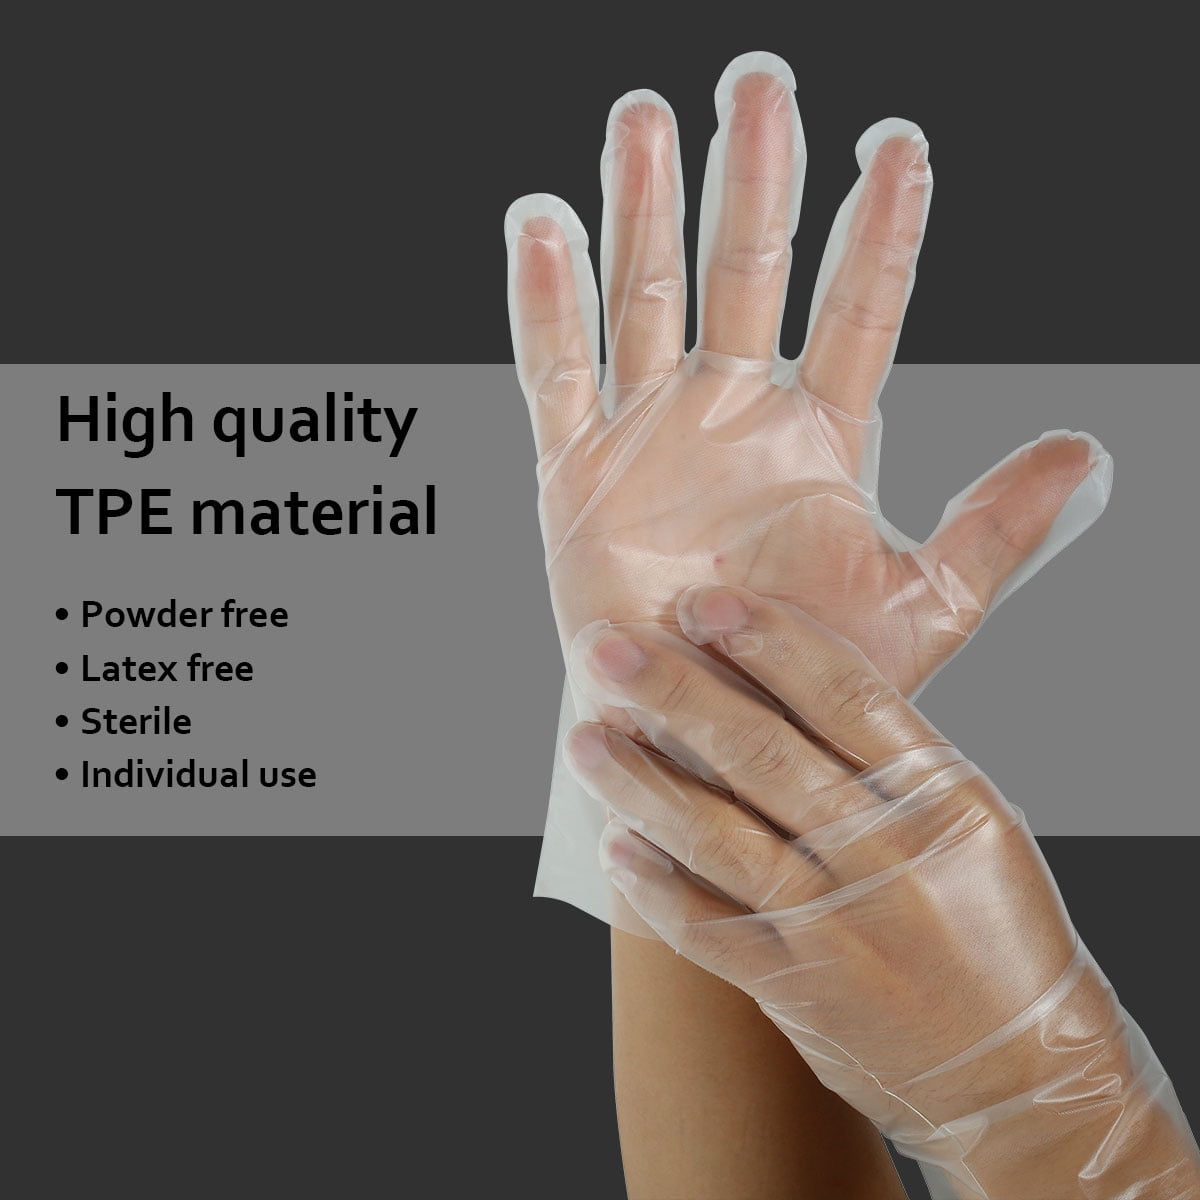 Powder-Free Clear Vinyl Gloves, Latex Free Glove, TPE Gloves - 100pcs/box  Disposable Gloves for Household Food Handling Lab Work